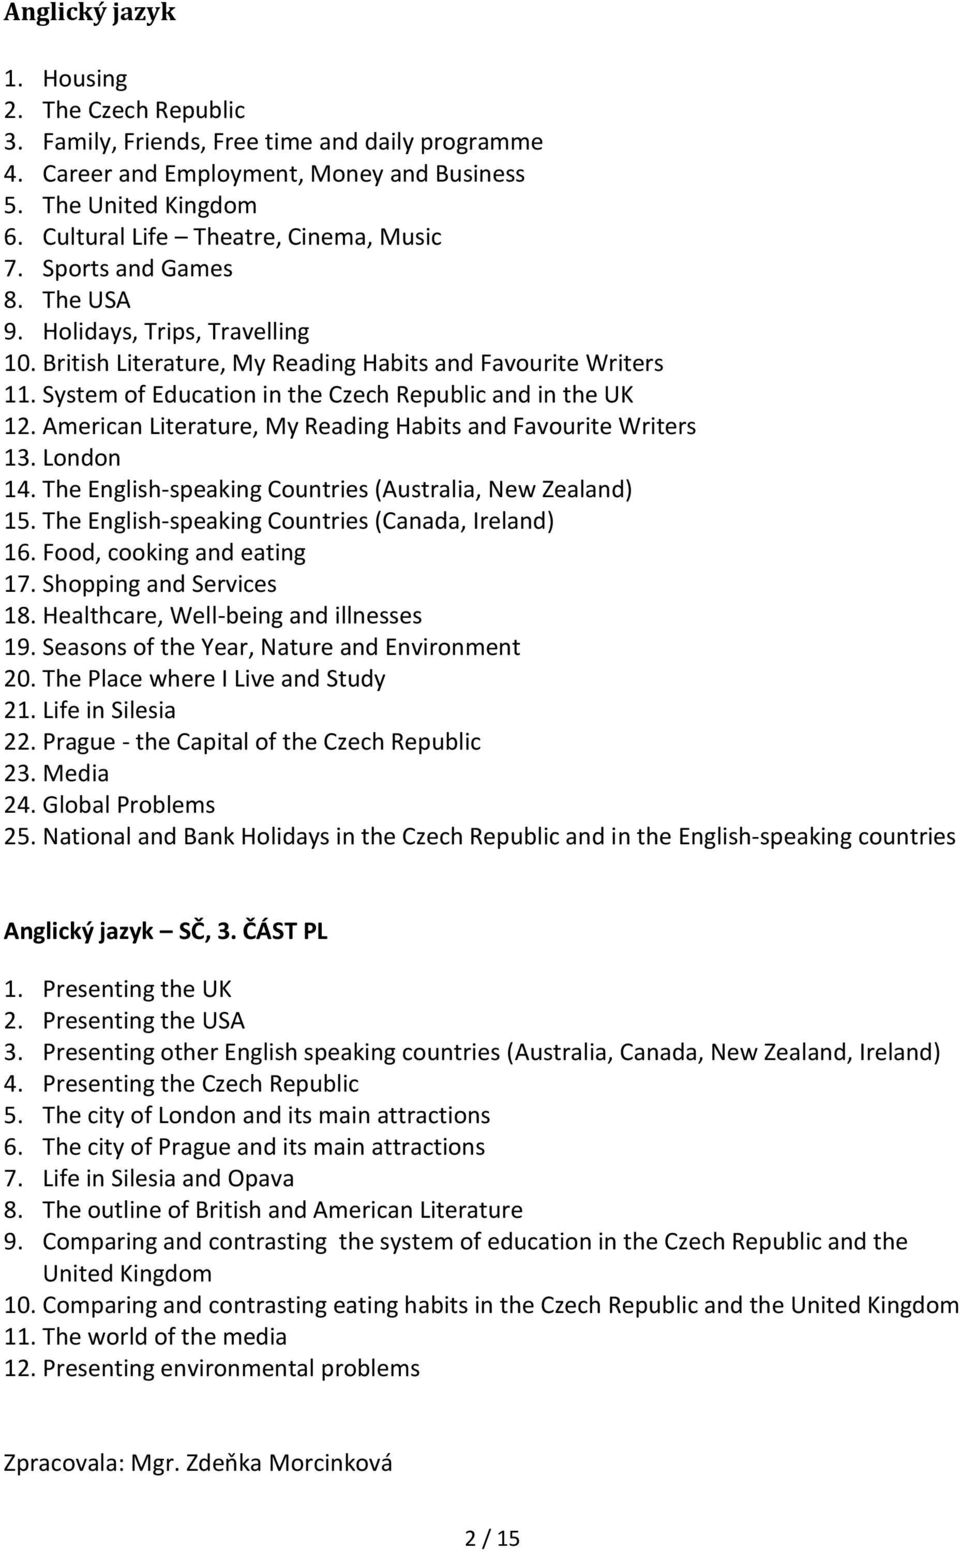 System of Education in the Czech Republic and in the UK 12. American Literature, My Reading Habits and Favourite Writers 13. London 14. The English-speaking Countries (Australia, New Zealand) 15.